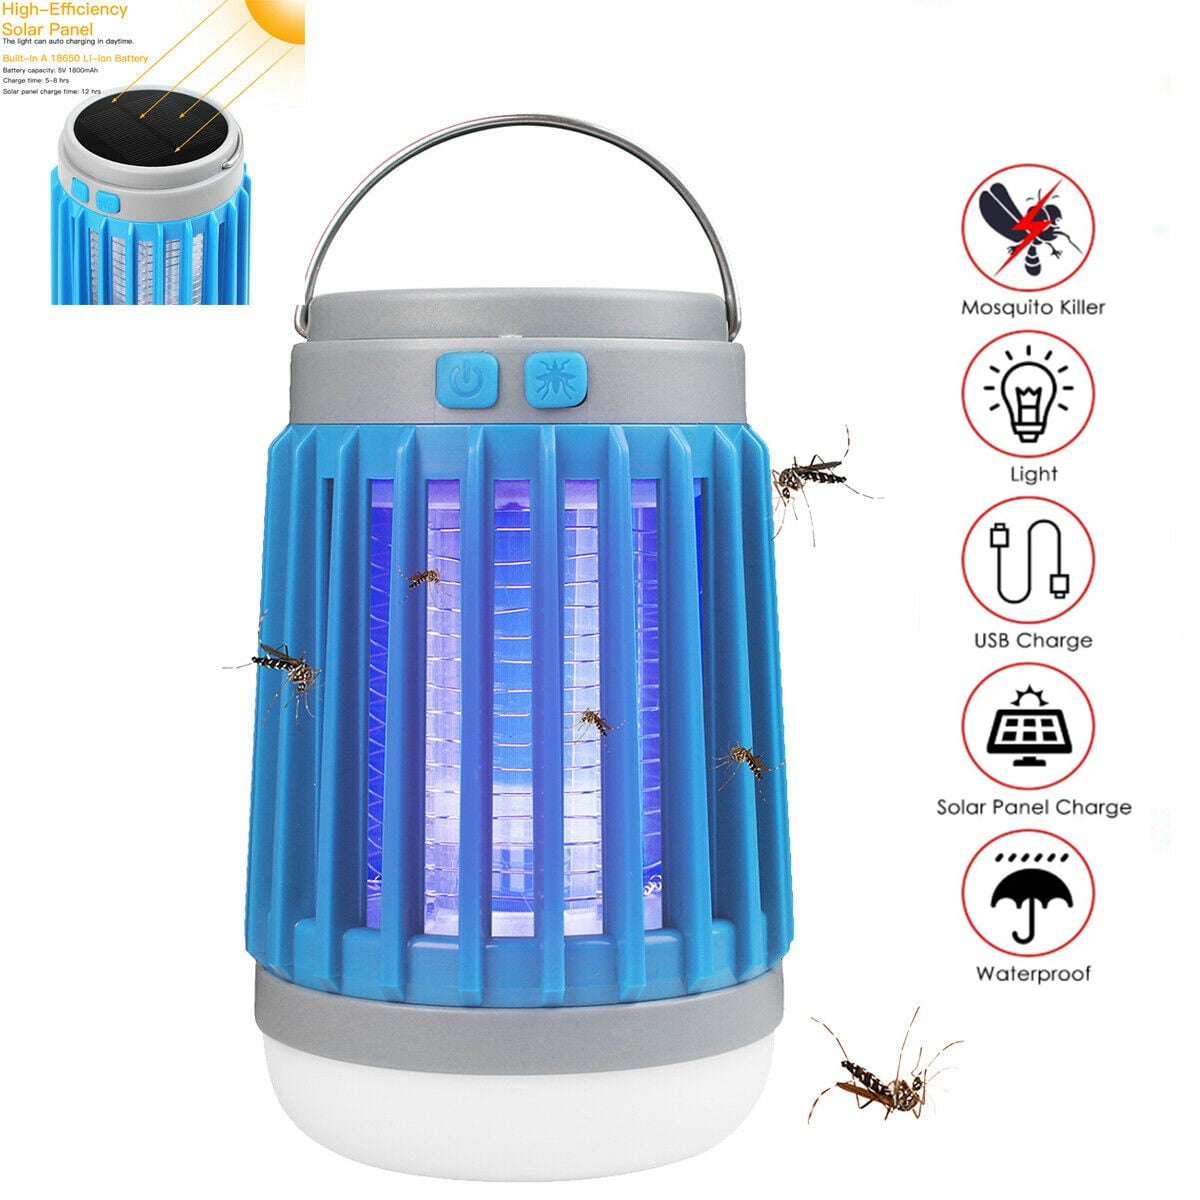 Details about   Camping LED Lamp Flying Mosquito Killer Anti Pest Control Night Light Hiking 